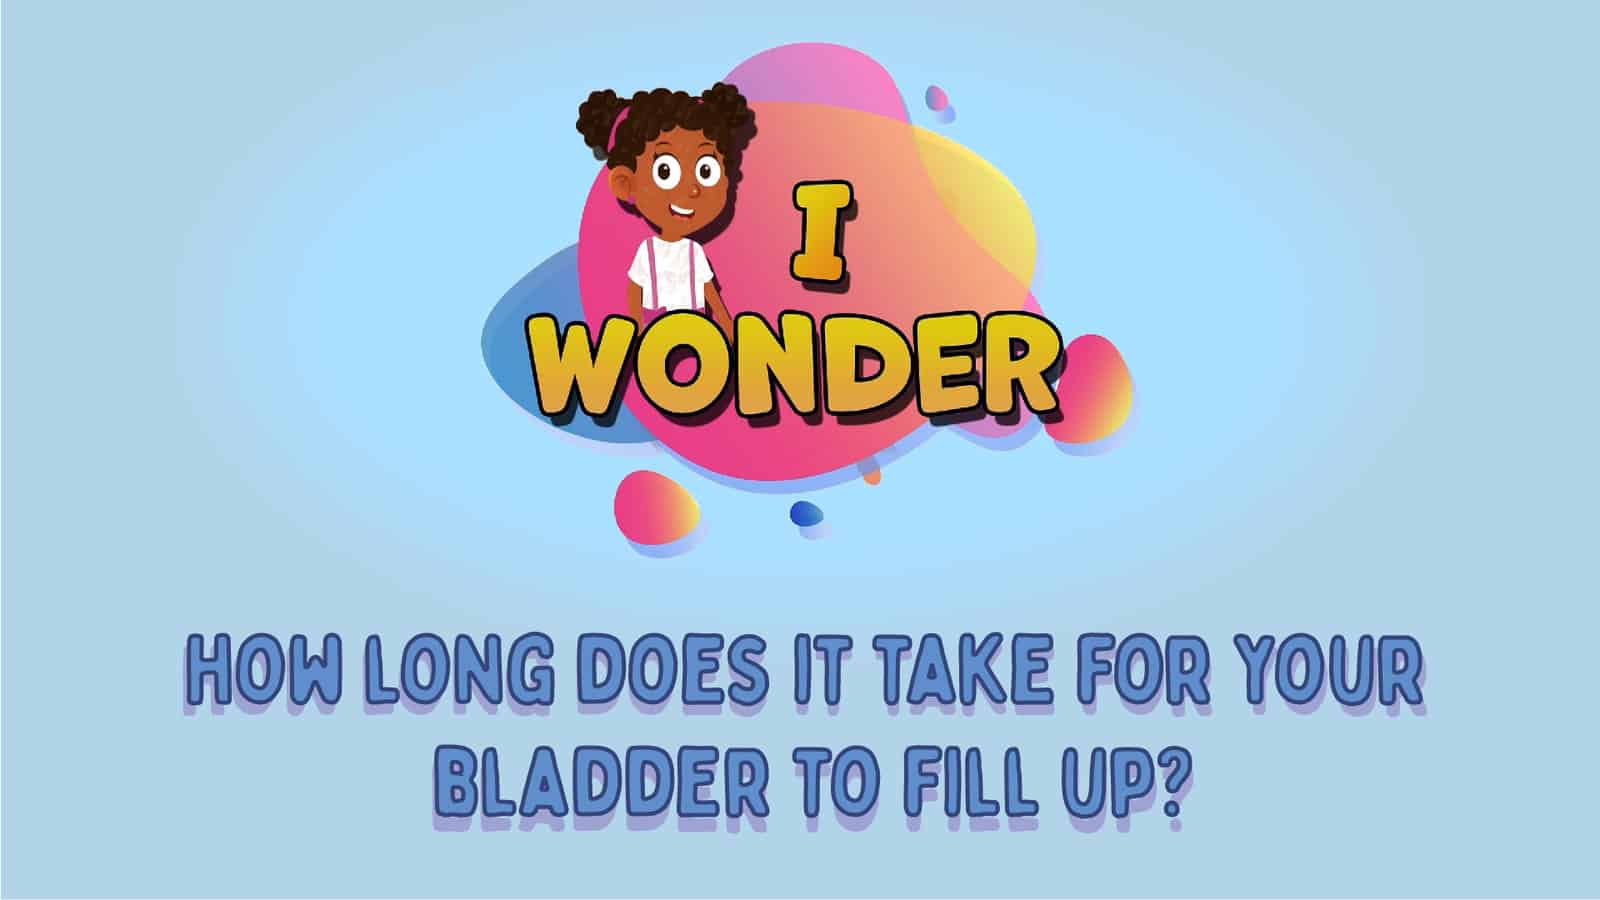 How Long Does It Take For Your Bladder To Fill Up?